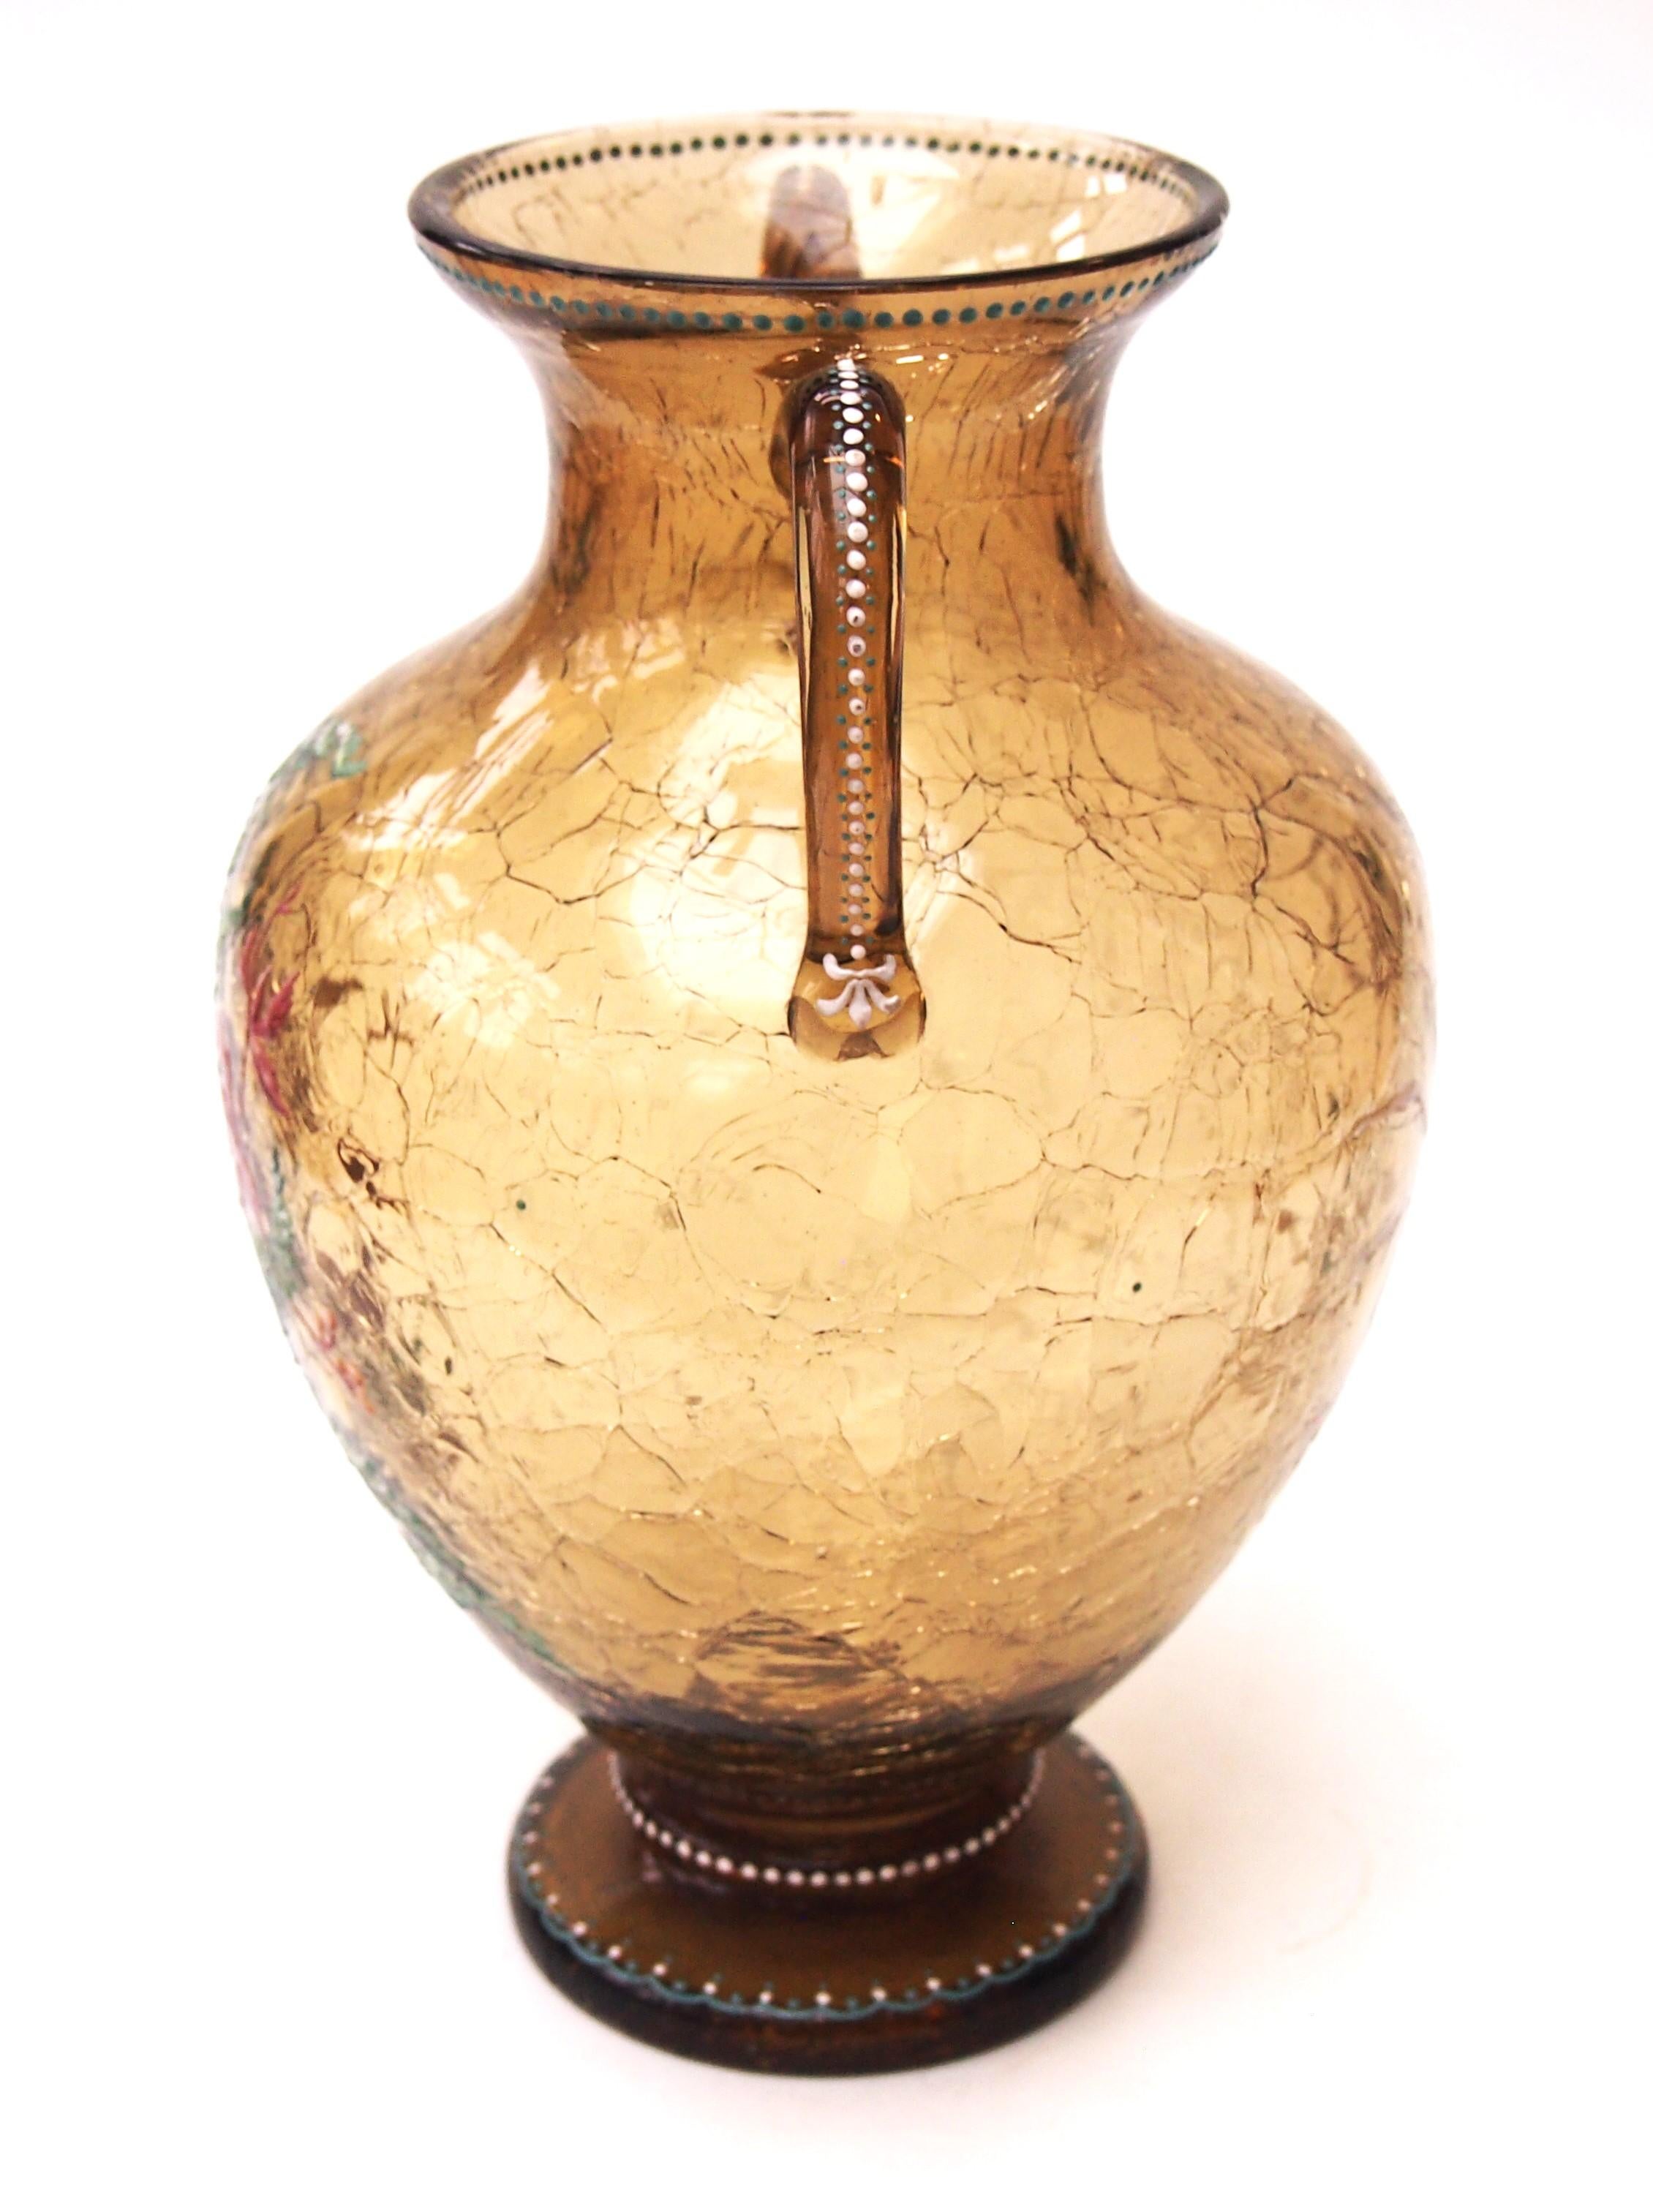 Fabulous good sized early Moser Crackle glass vase in rich brown colour heavily and finely enamelled with foliage of various kinds in greens and purples on both sides of the vase -The vase has two hot applied handles which are also enamelled with a